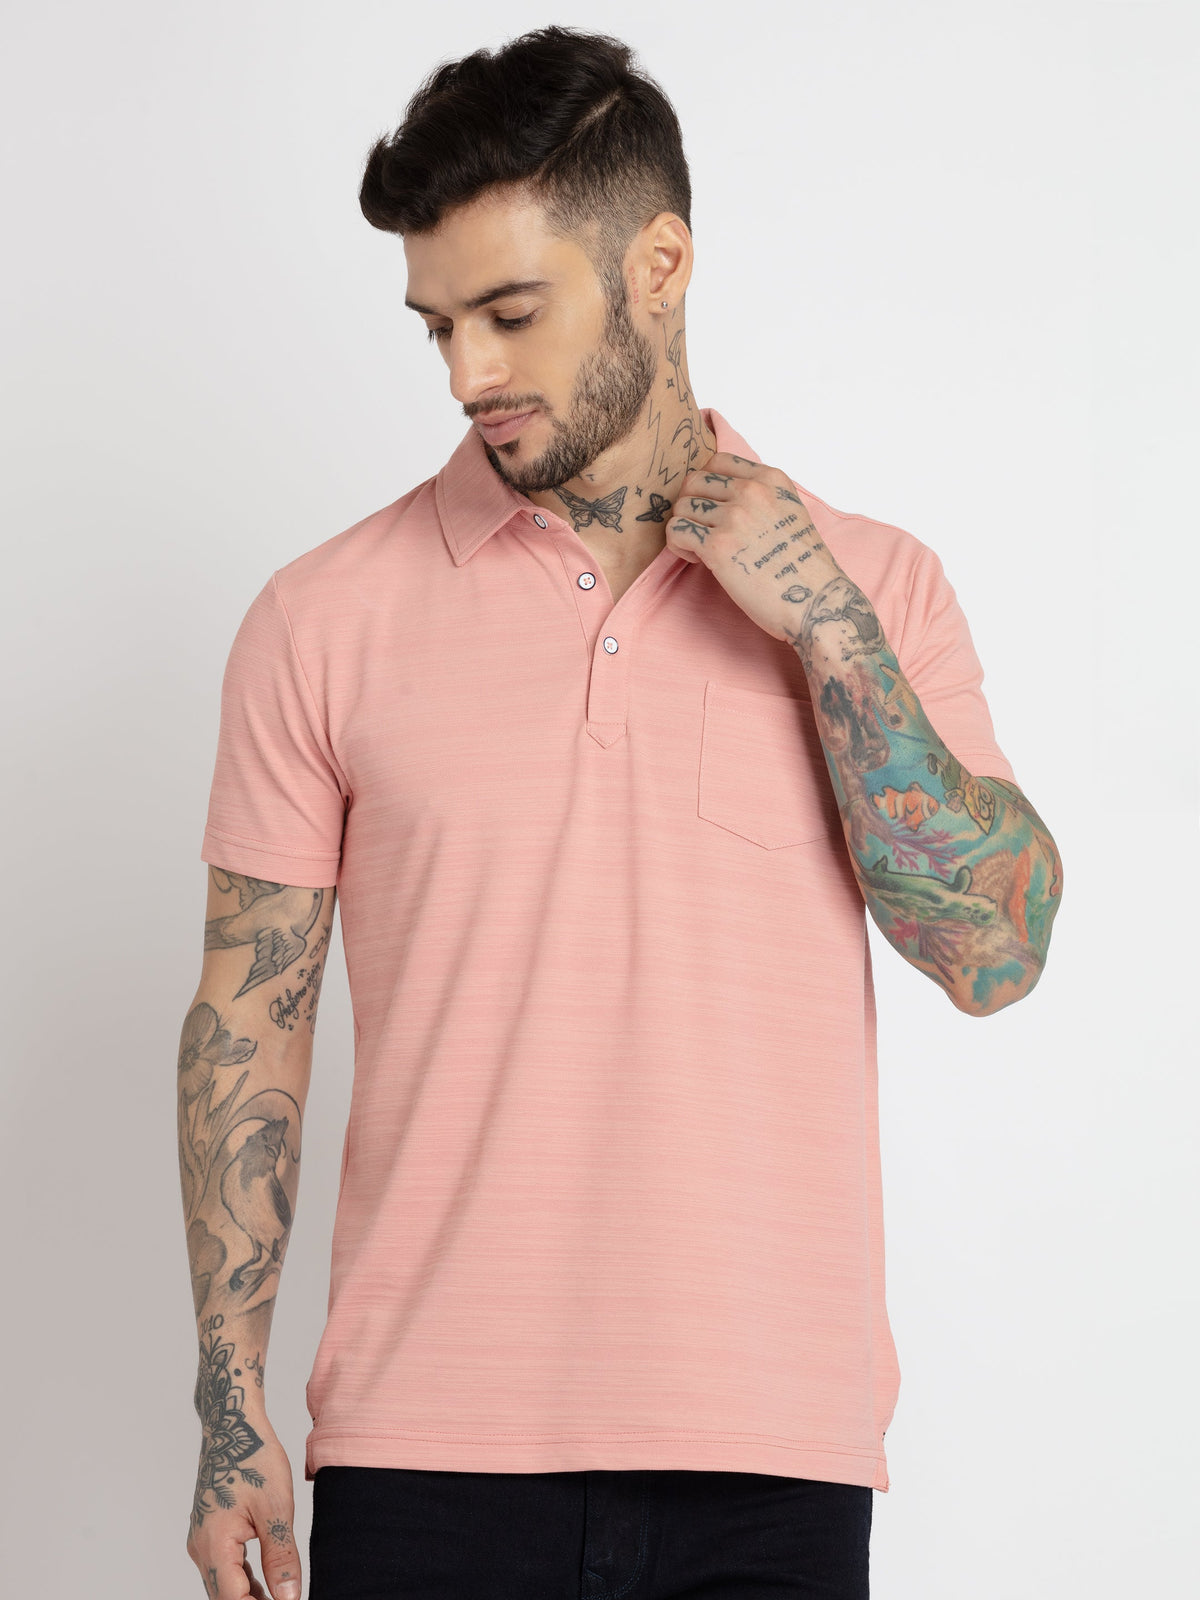 solid polo t shirt